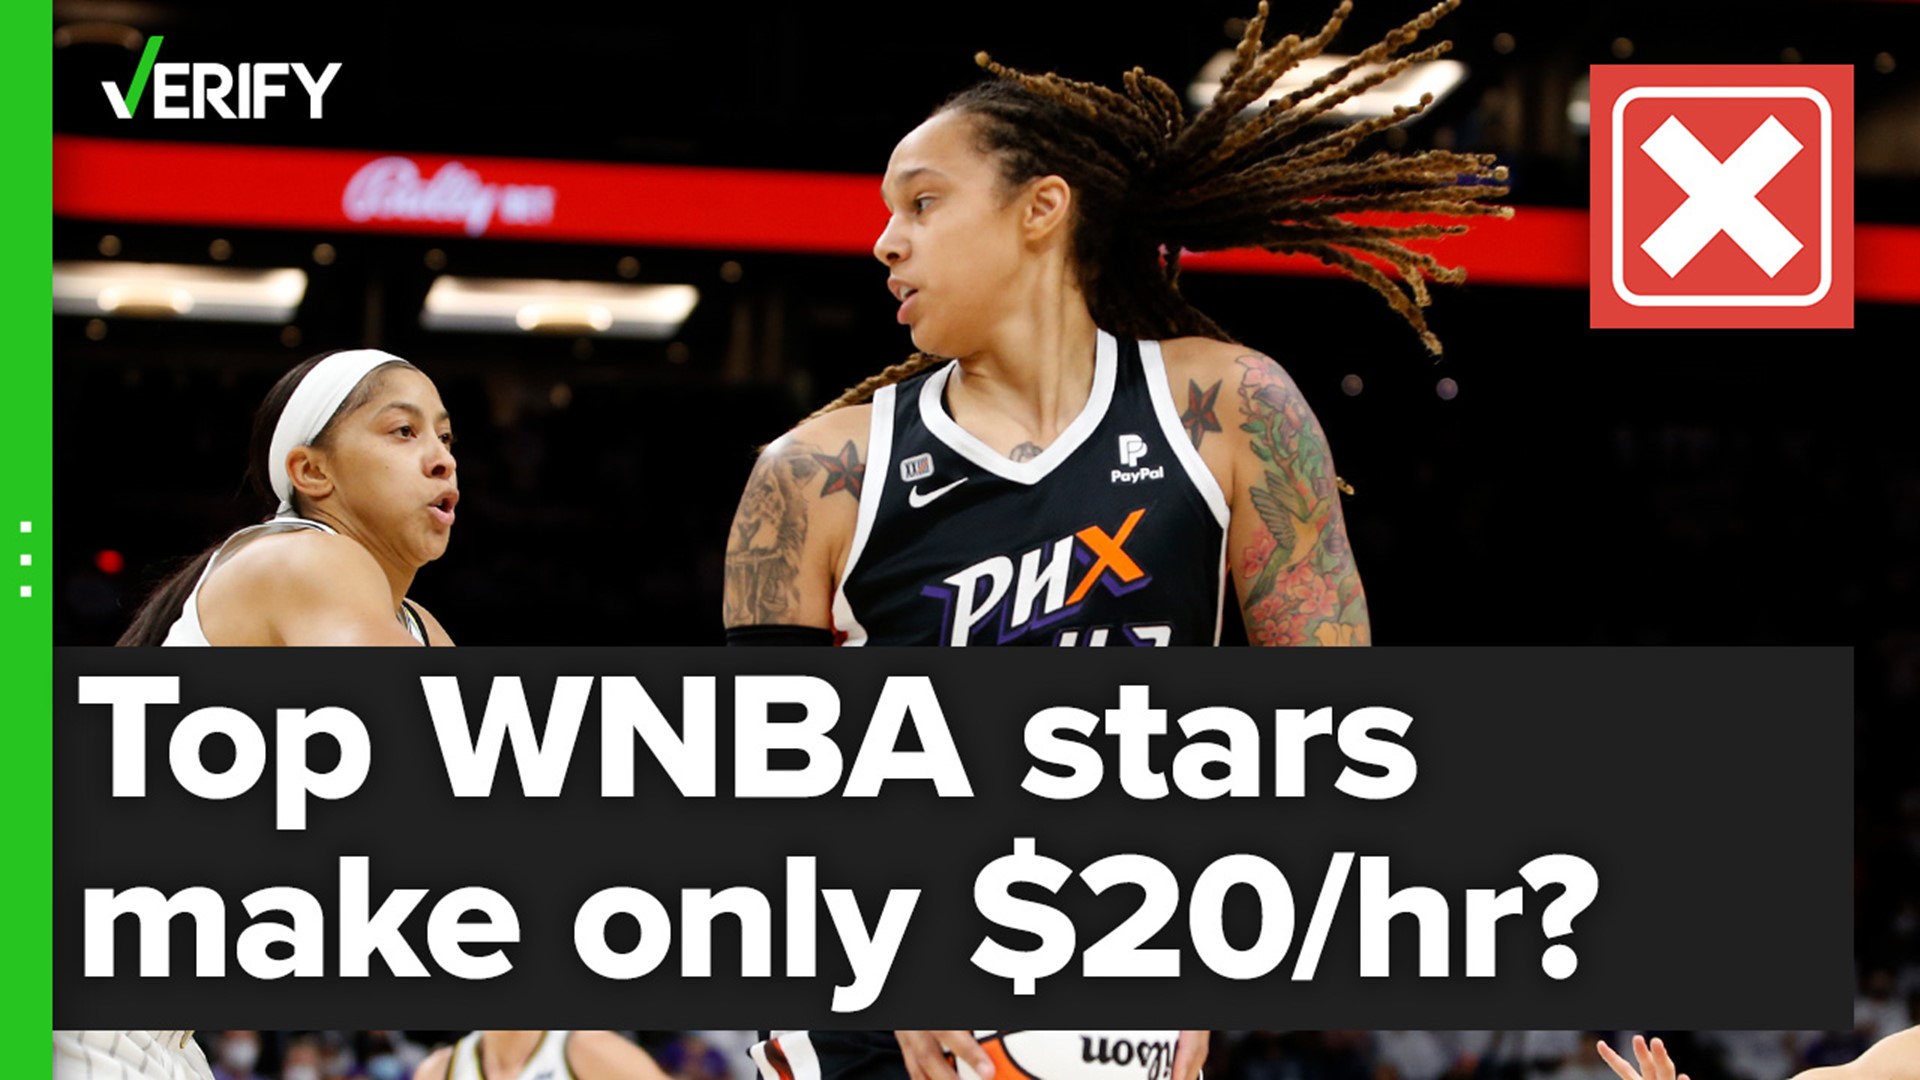 Top-tier WNBA players do not make only $20 an hour. They make more.